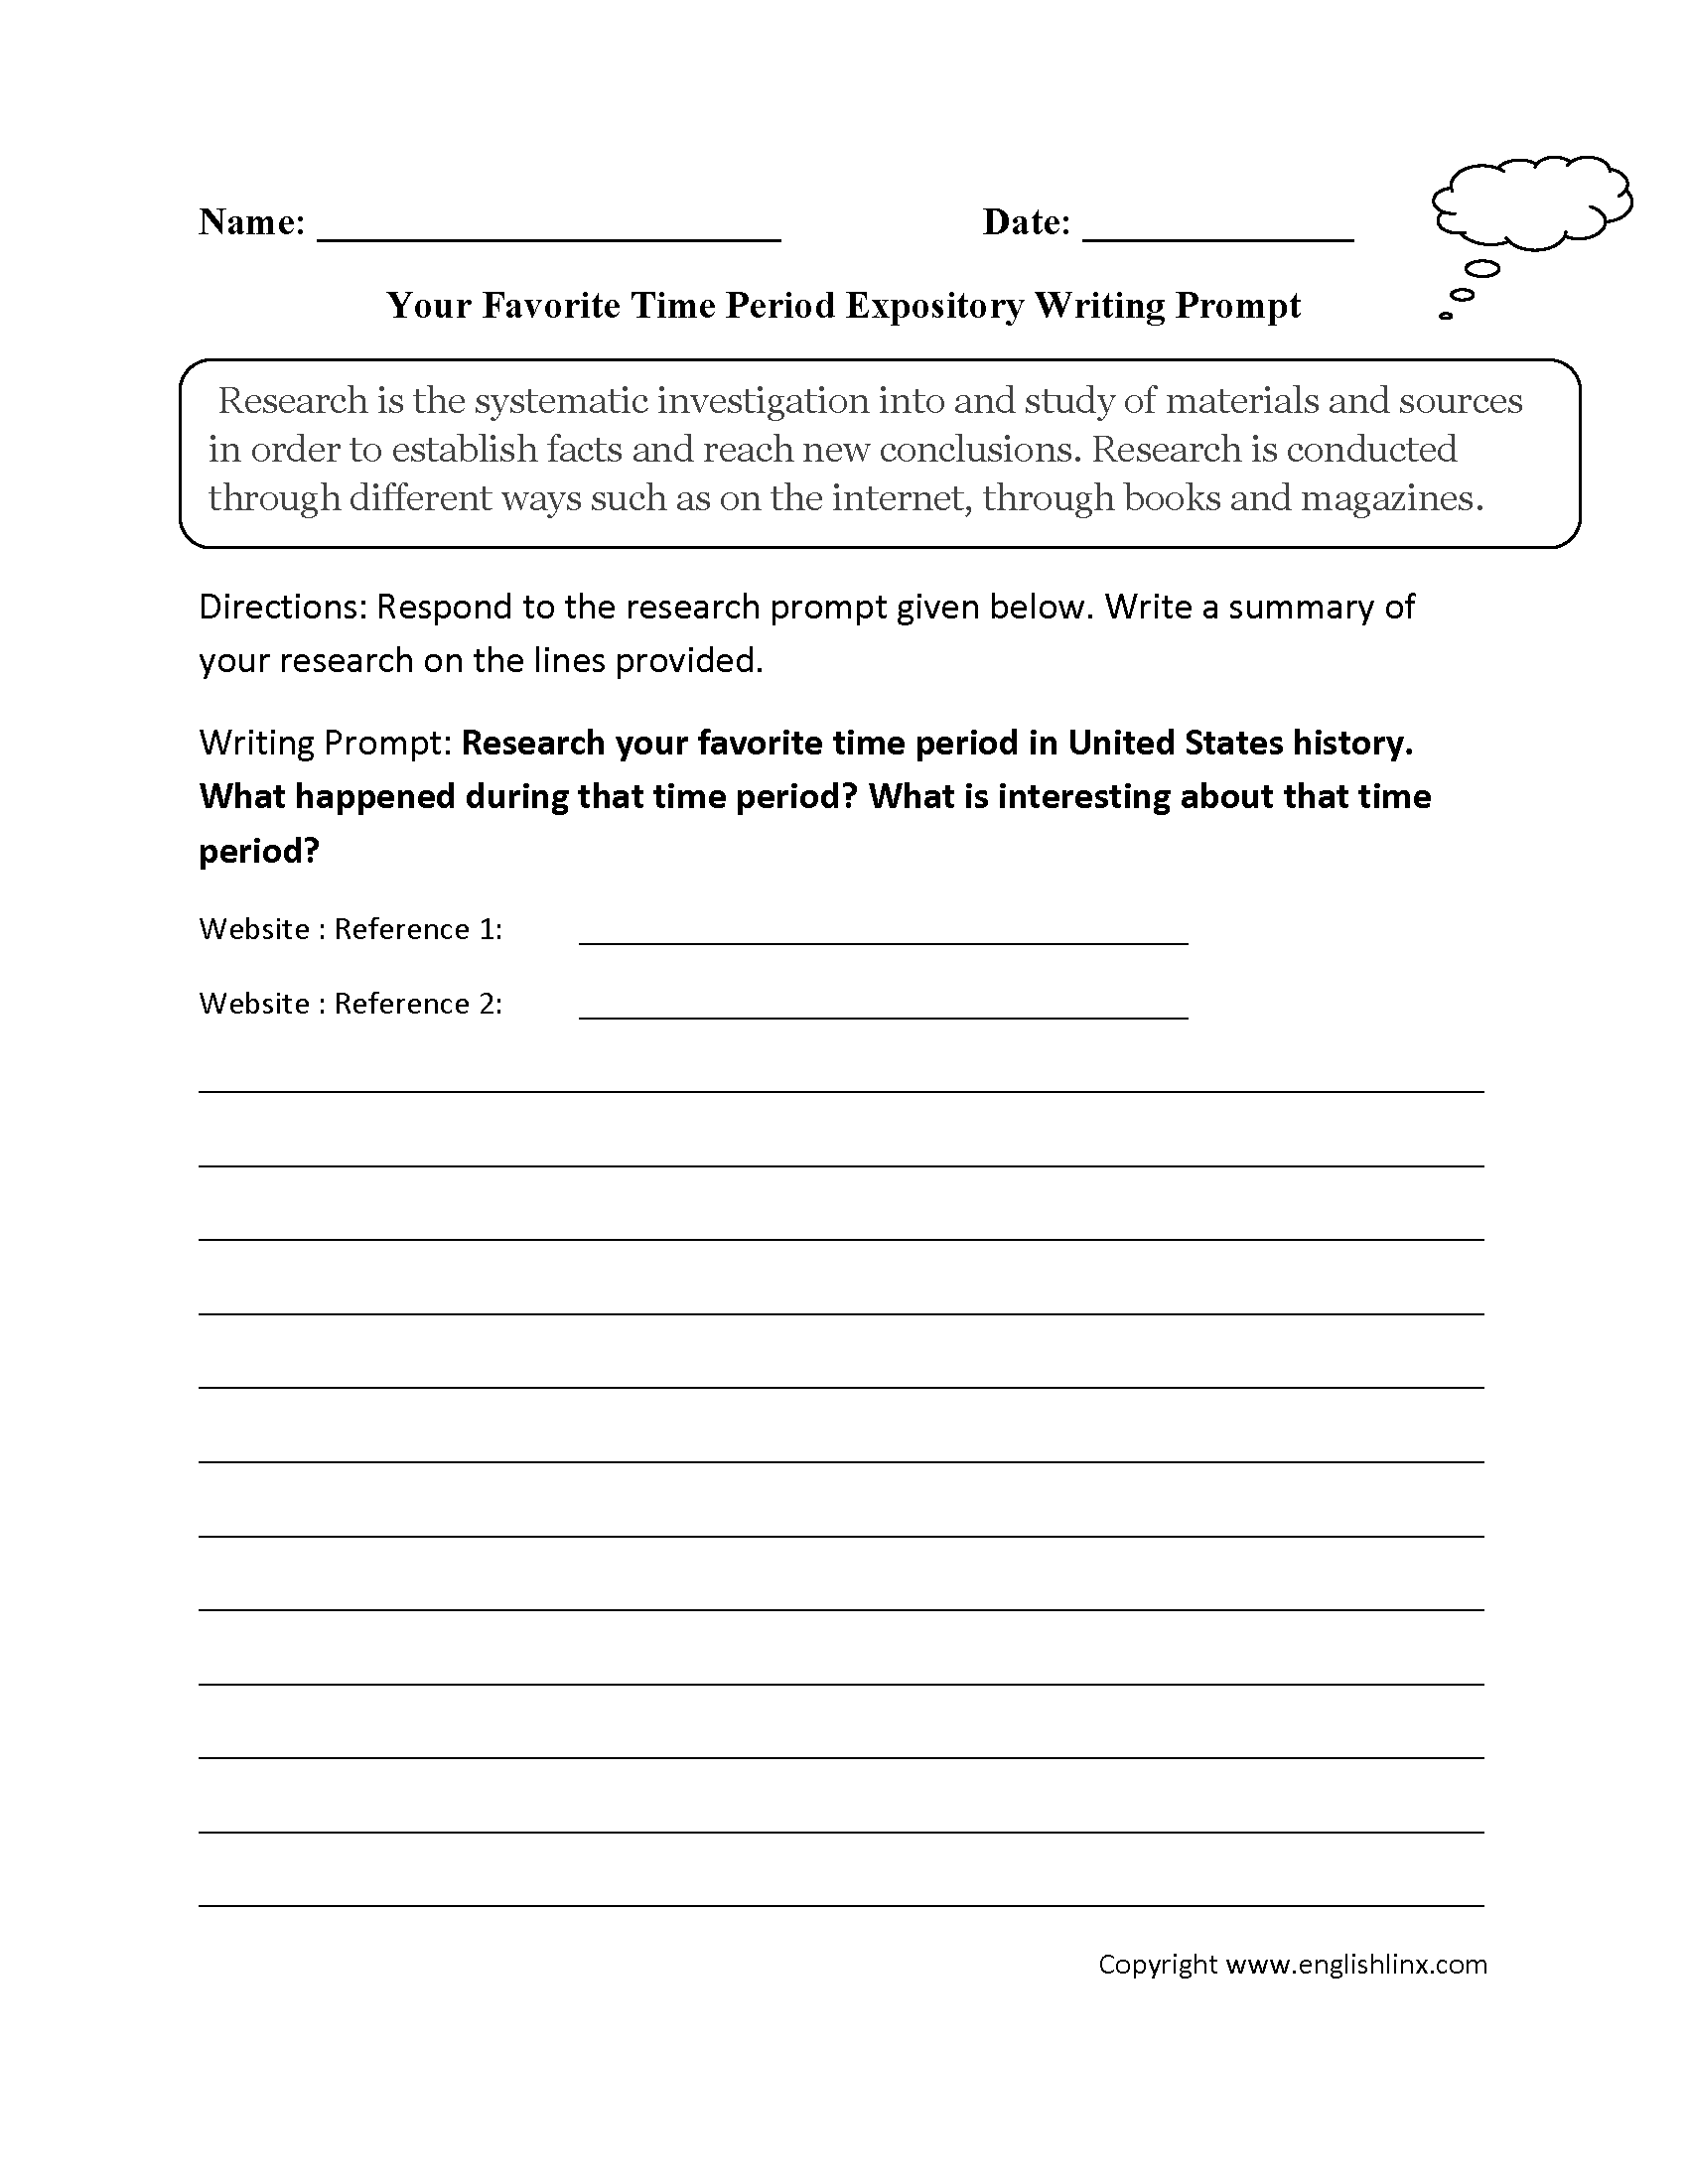 Time Period Expository and Research Writing Prompts Worksheets